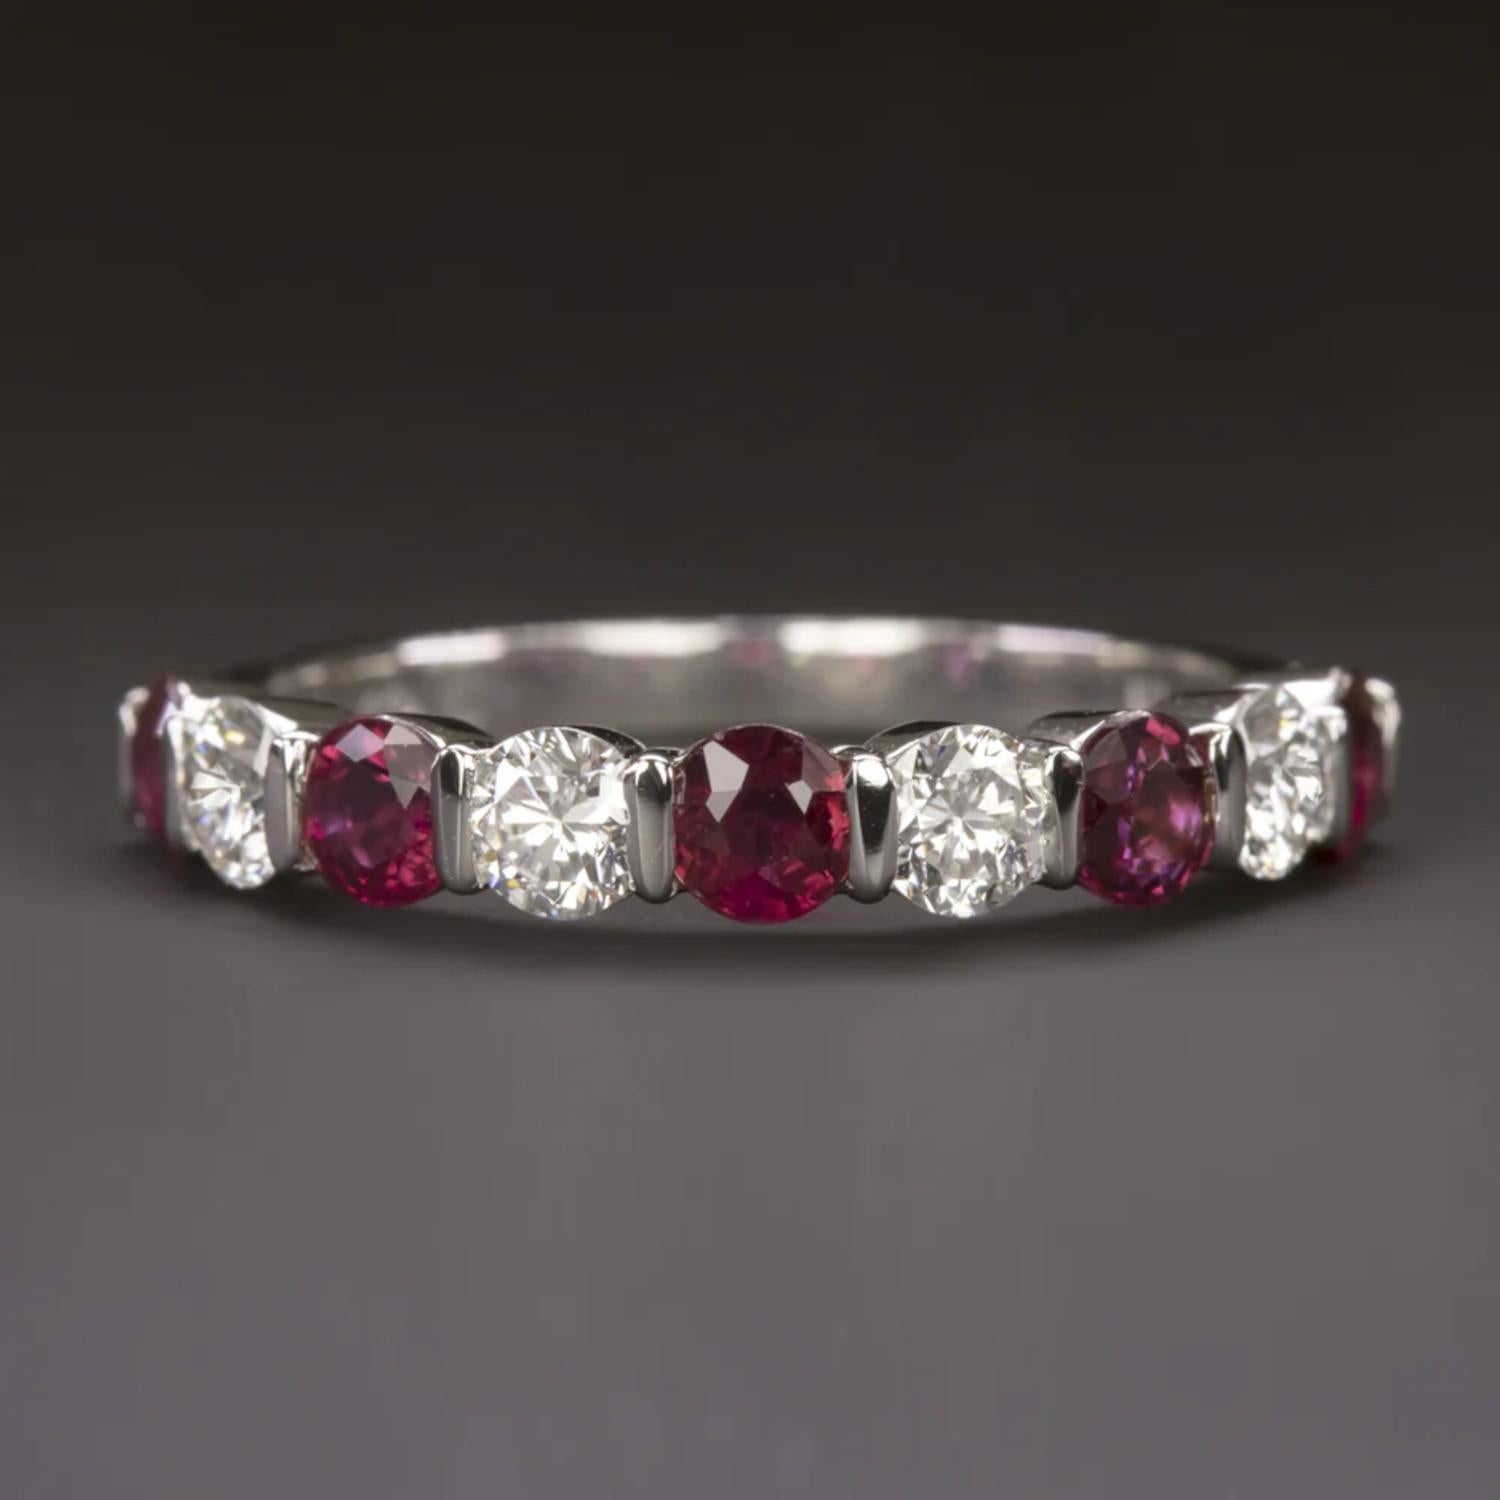 This amazing diamond and ruby ring is very high quality with a platinum setting and top quality diamonds and rubies. It is a great choice for a wedding band or a stand alone piece.

- 0.40ct of very high quality bright white and exceptionally clean